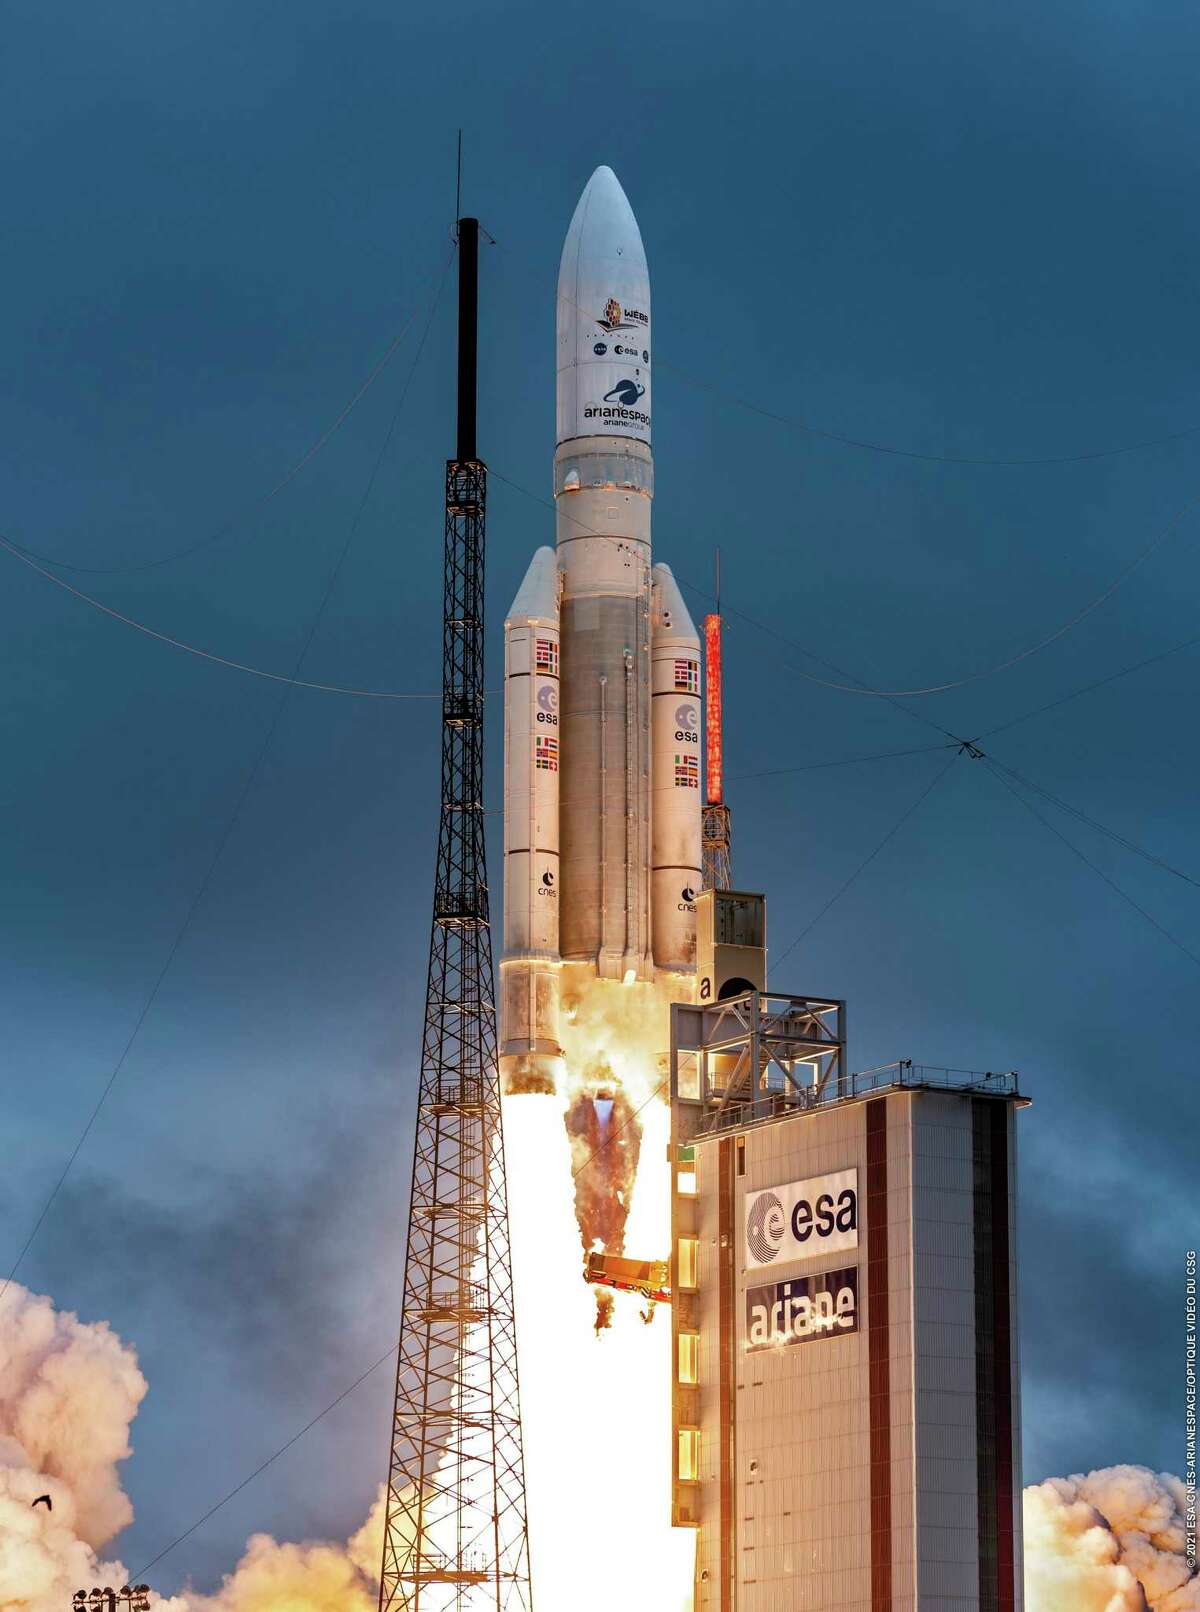 Arianespace's Ariane 5 rocket with NASA's James Webb Space Telescope onboard, lifts off Dec. 25, 2021, at Europe's Spaceport, the Guiana Space Center in Kourou, French Guiana. The world's largest and most powerful space telescope is on a high-stakes quest to behold light from the first stars and galaxies.